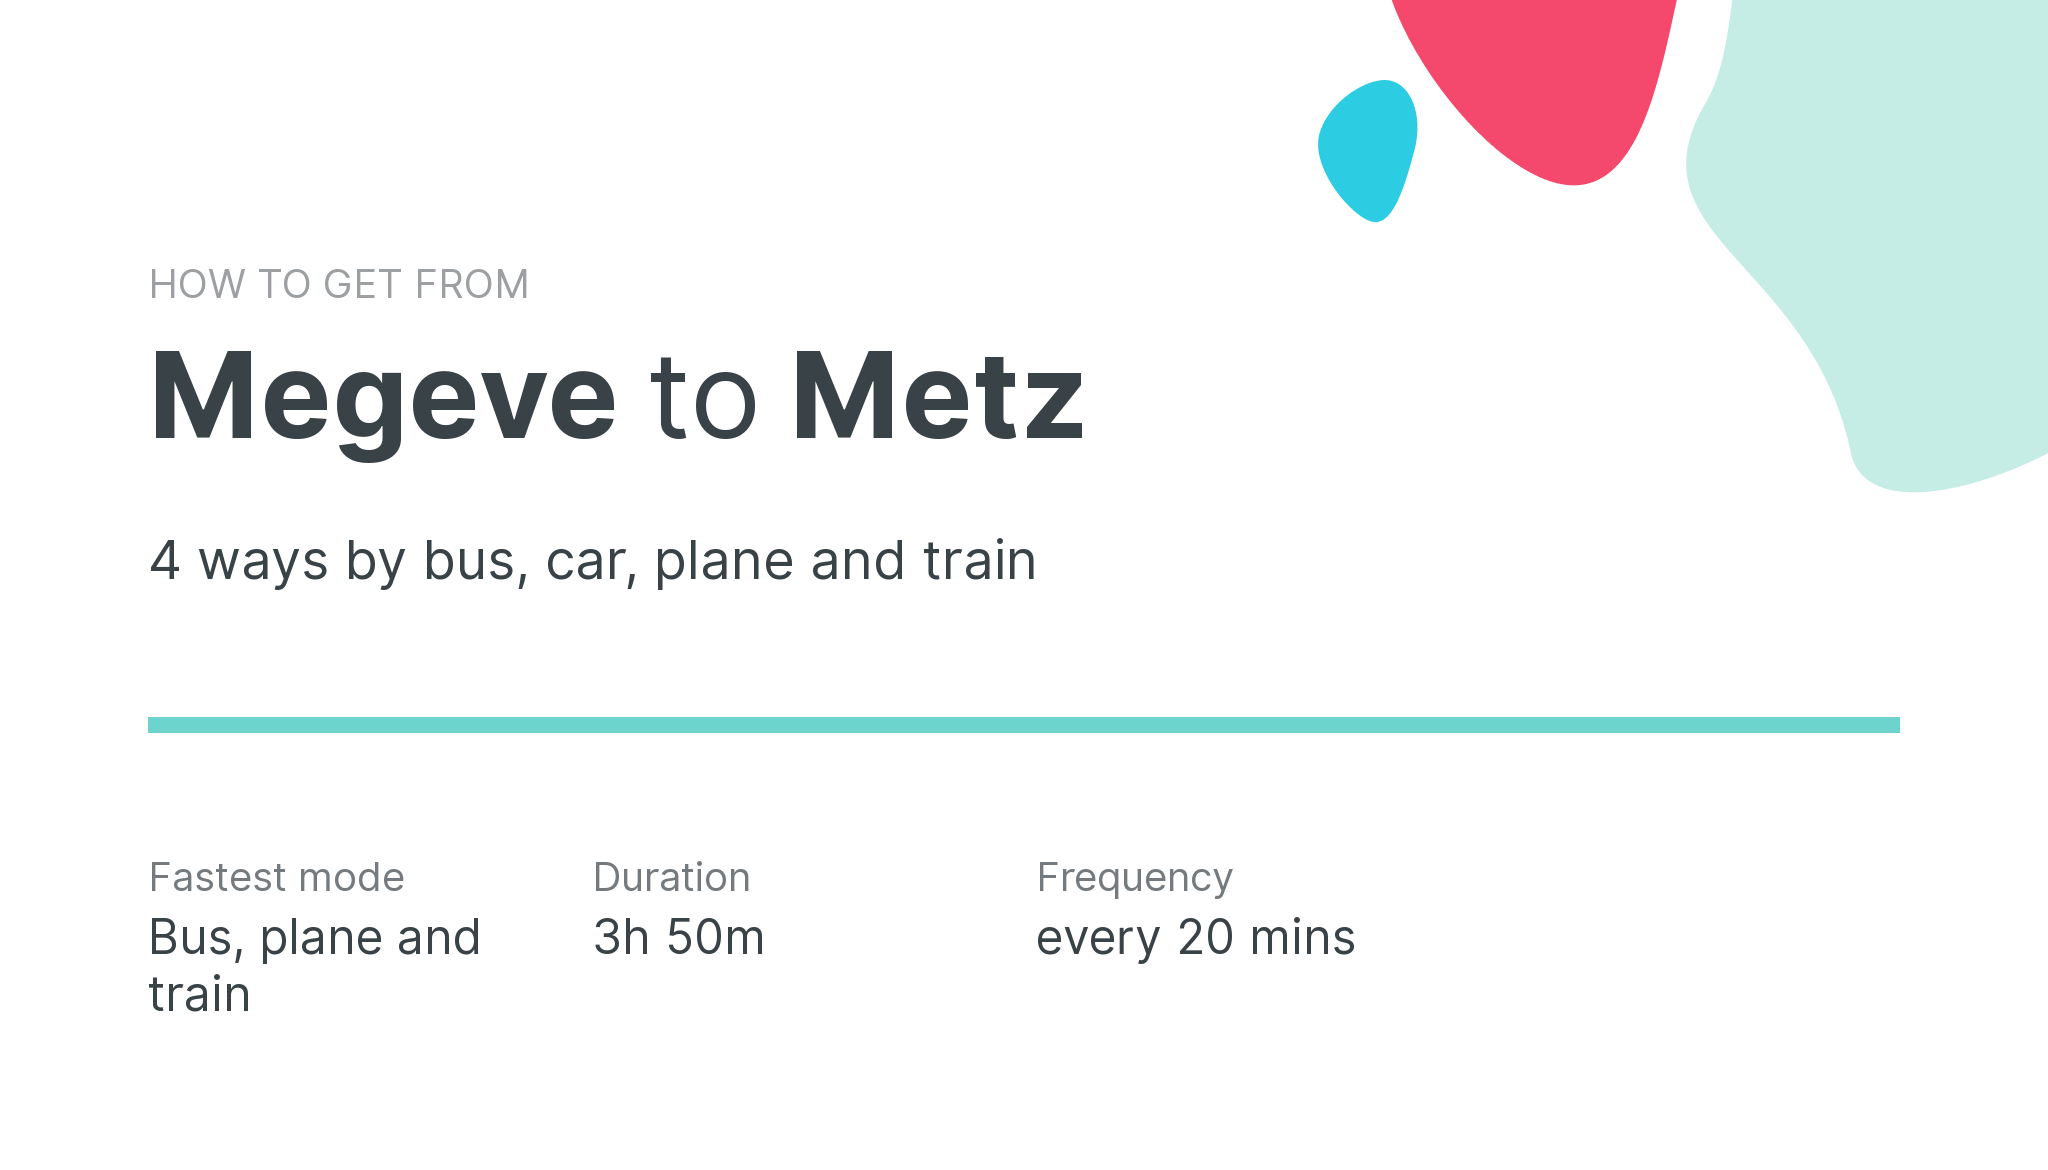 How do I get from Megeve to Metz